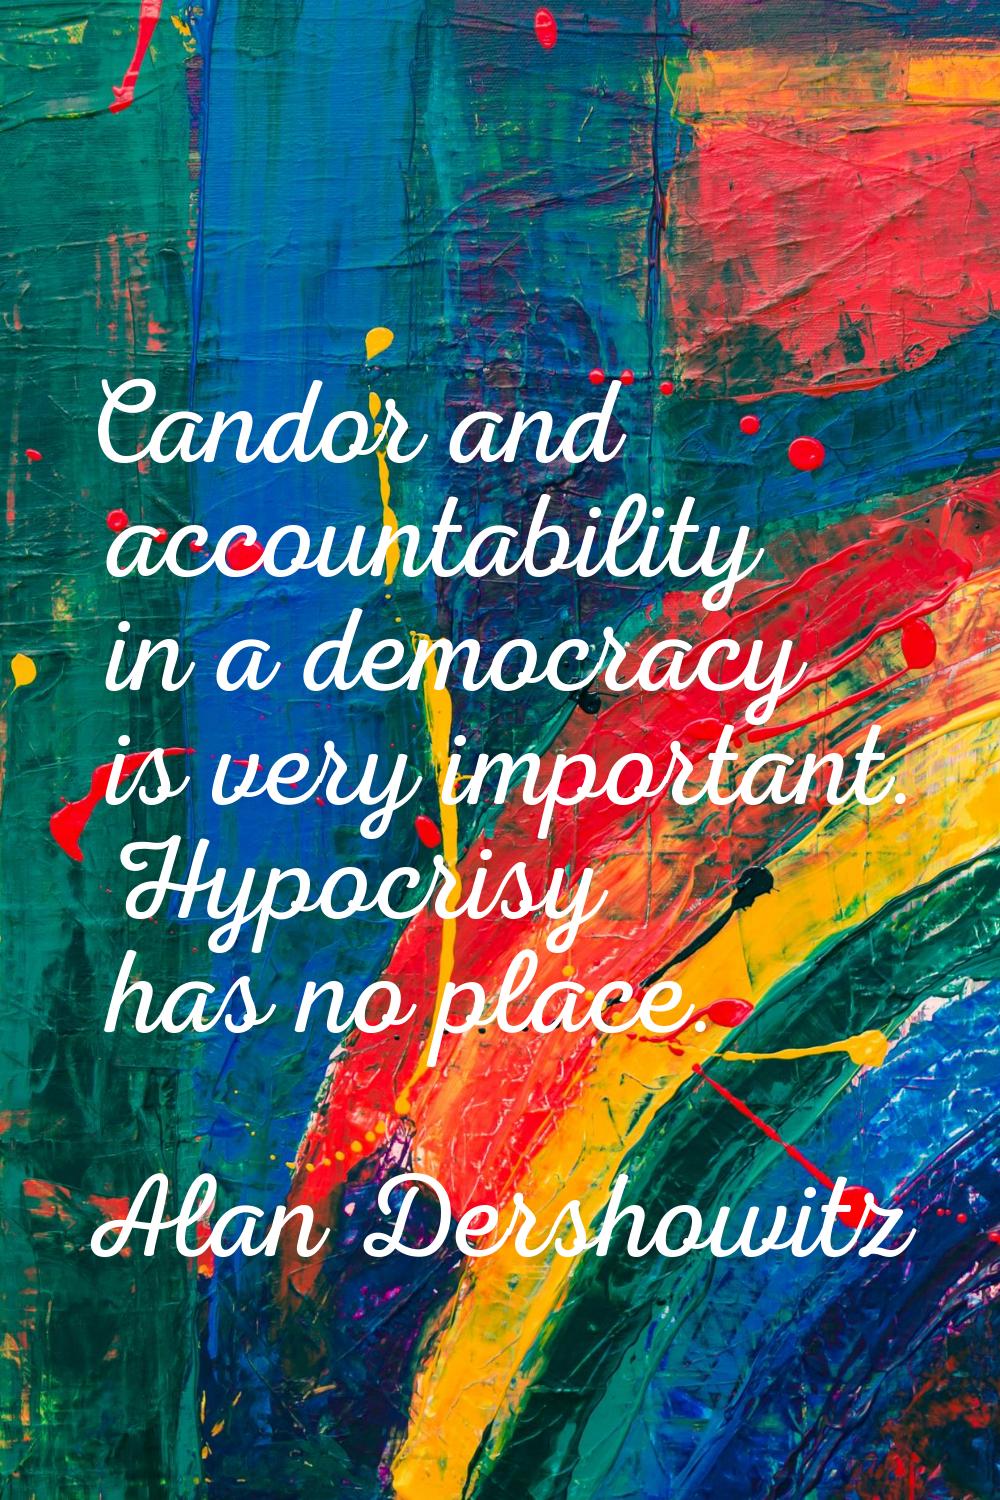 Candor and accountability in a democracy is very important. Hypocrisy has no place.